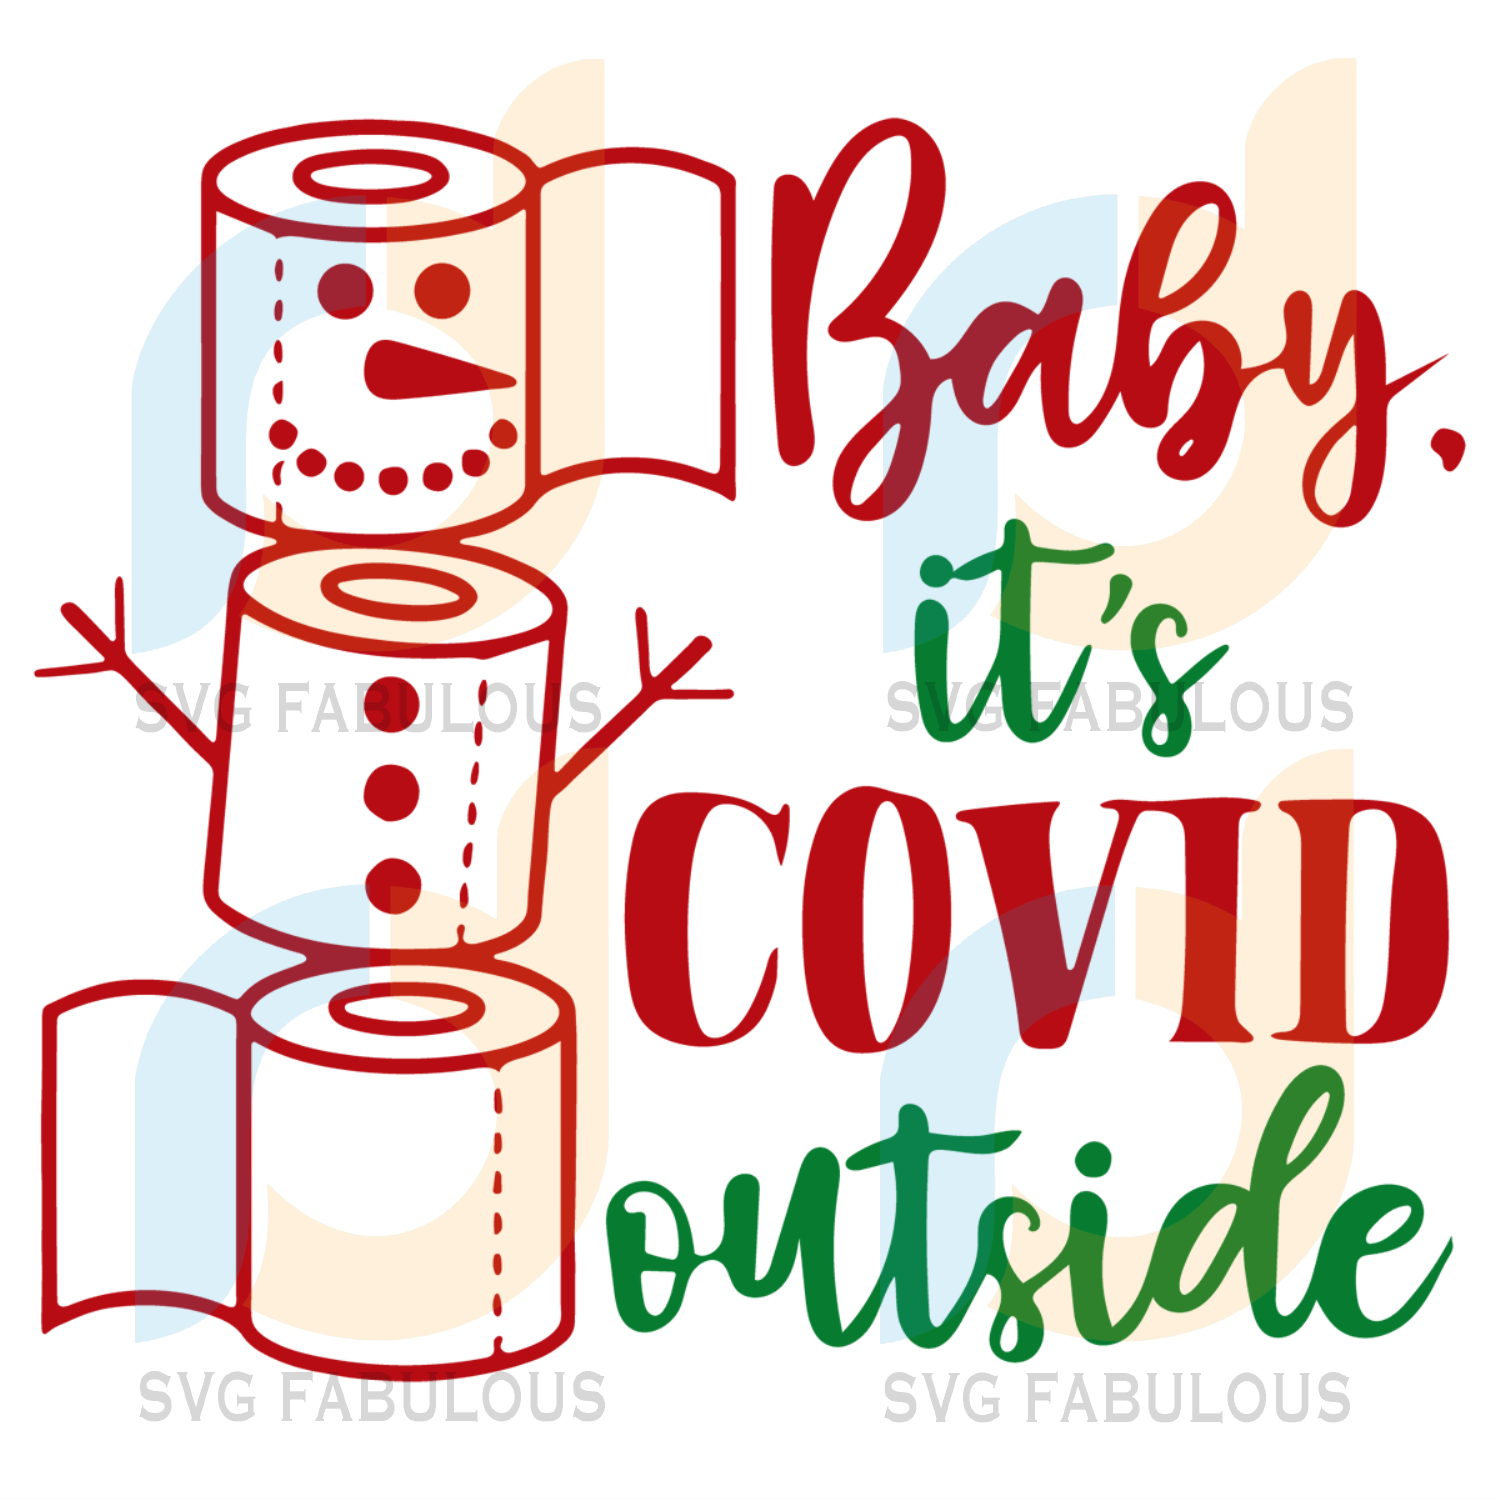 Download Baby Its Covid Outside Svg Christmas Svg Xmas Svg Merry Christmas Svg Fabulous